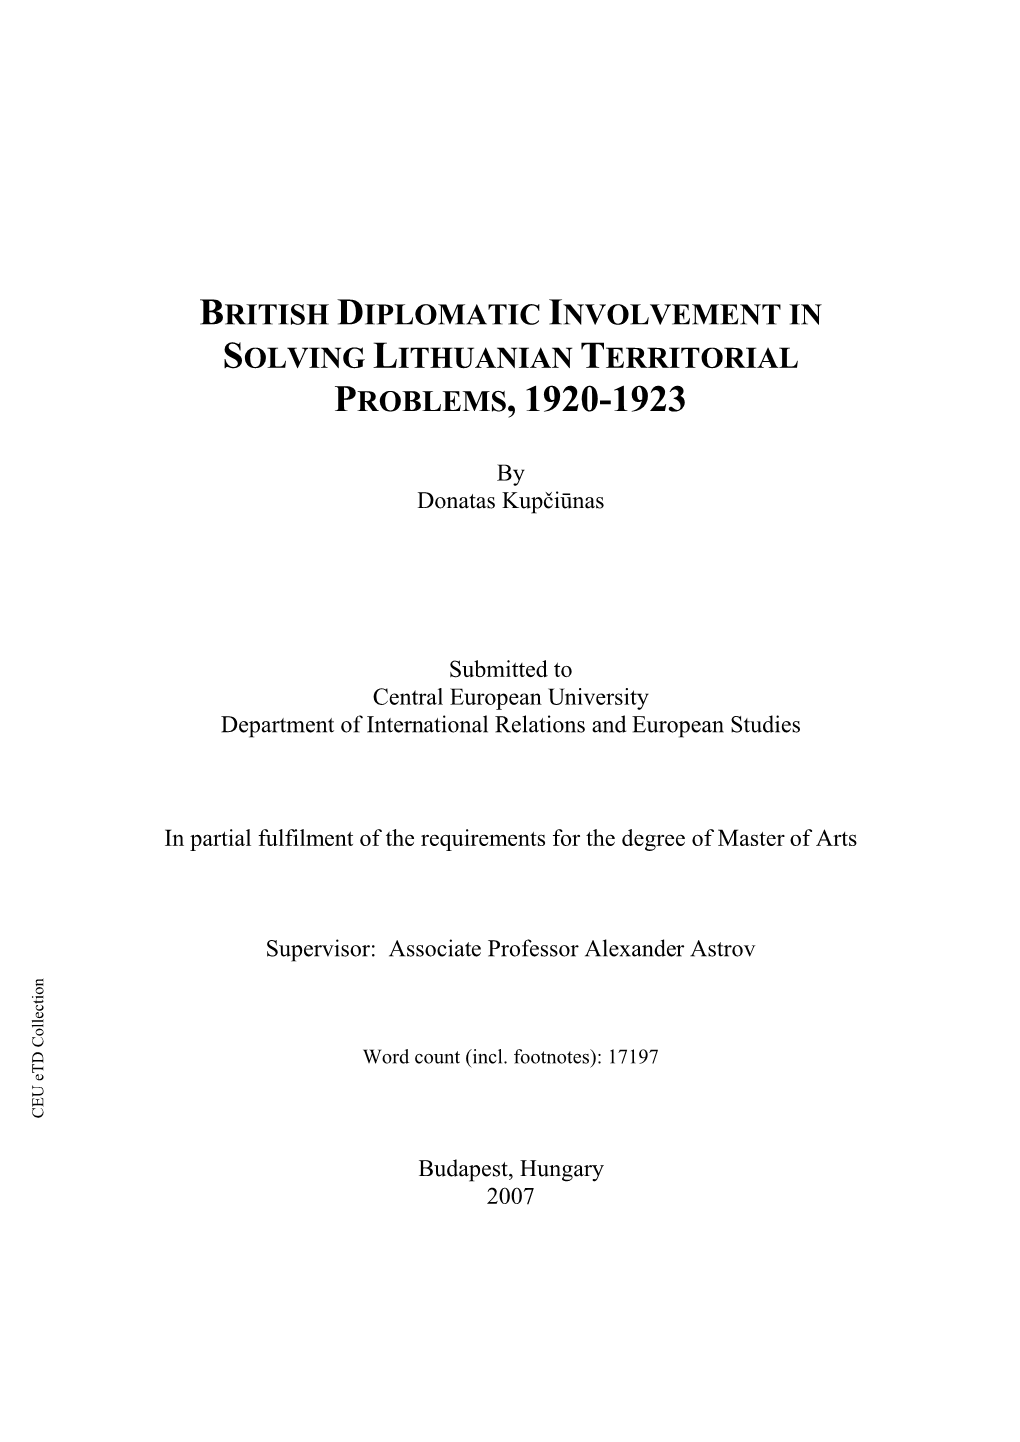 British Diplomatic Involvement in Solving Lithuanian Territorial Problems, 1920-1923